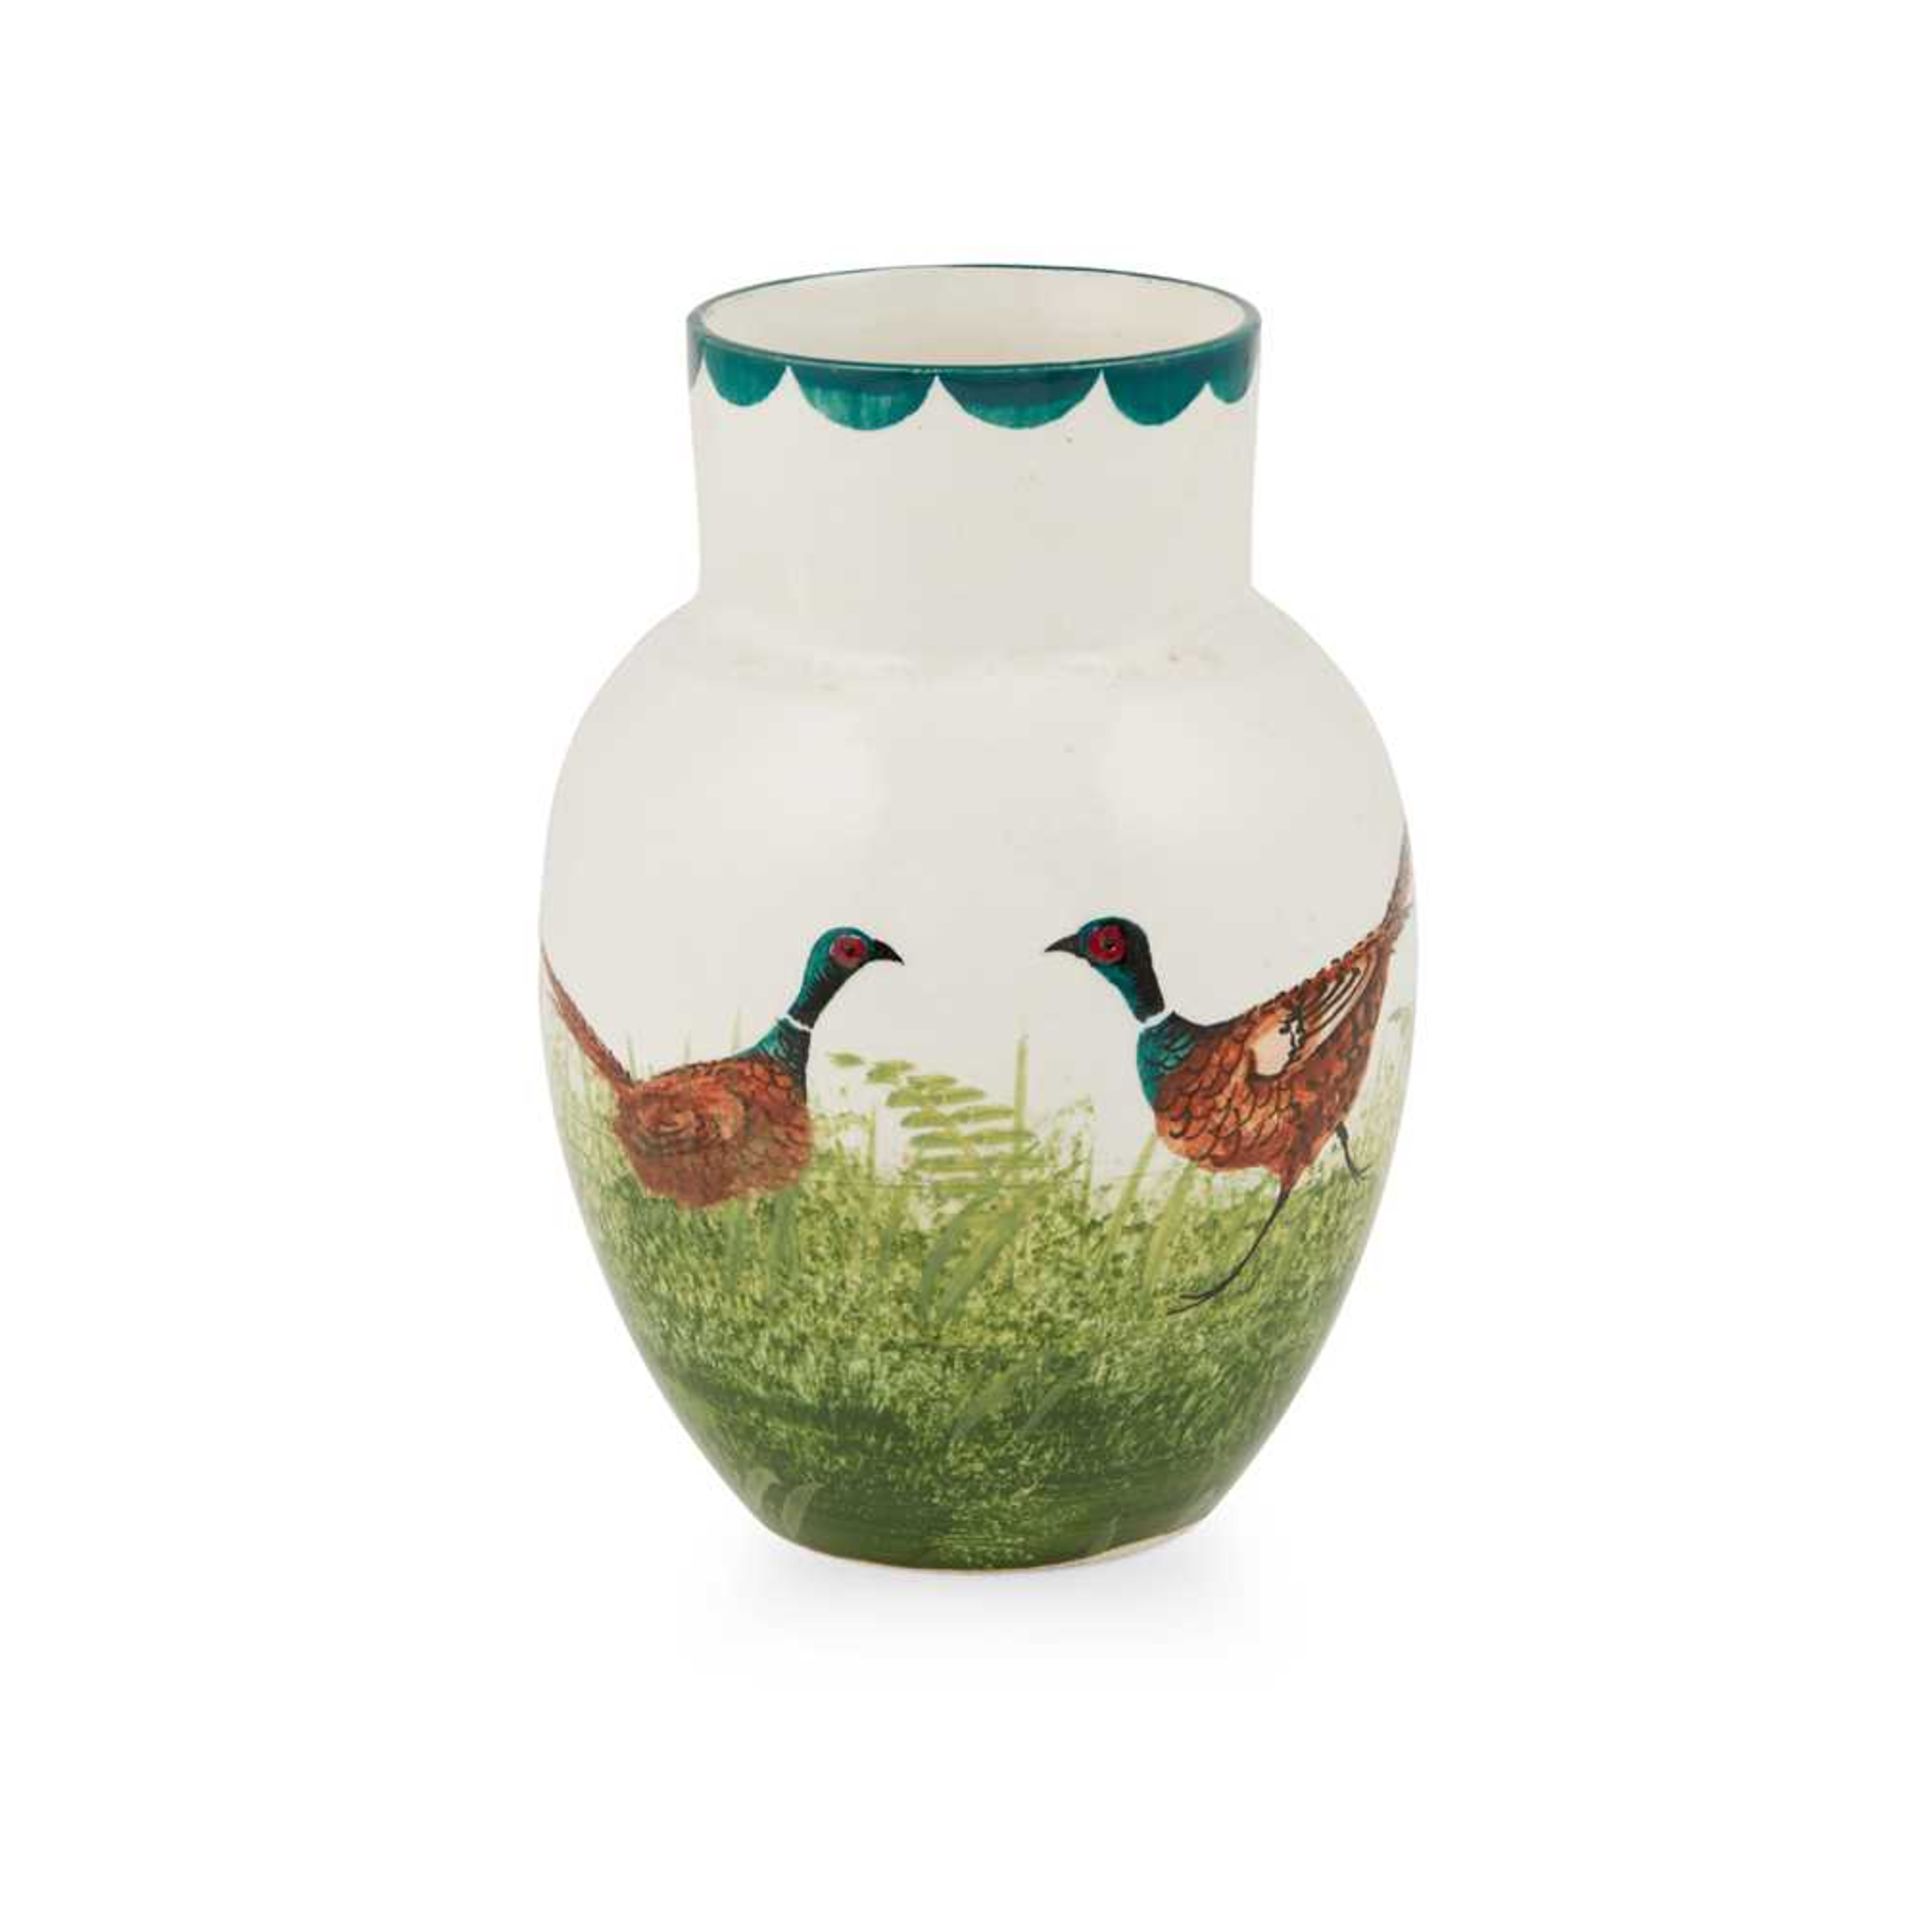 A WEMYSS WARE CARAFE 'PHEASANTS' PATTERN, EARLY 20TH CENTURY - Image 2 of 2